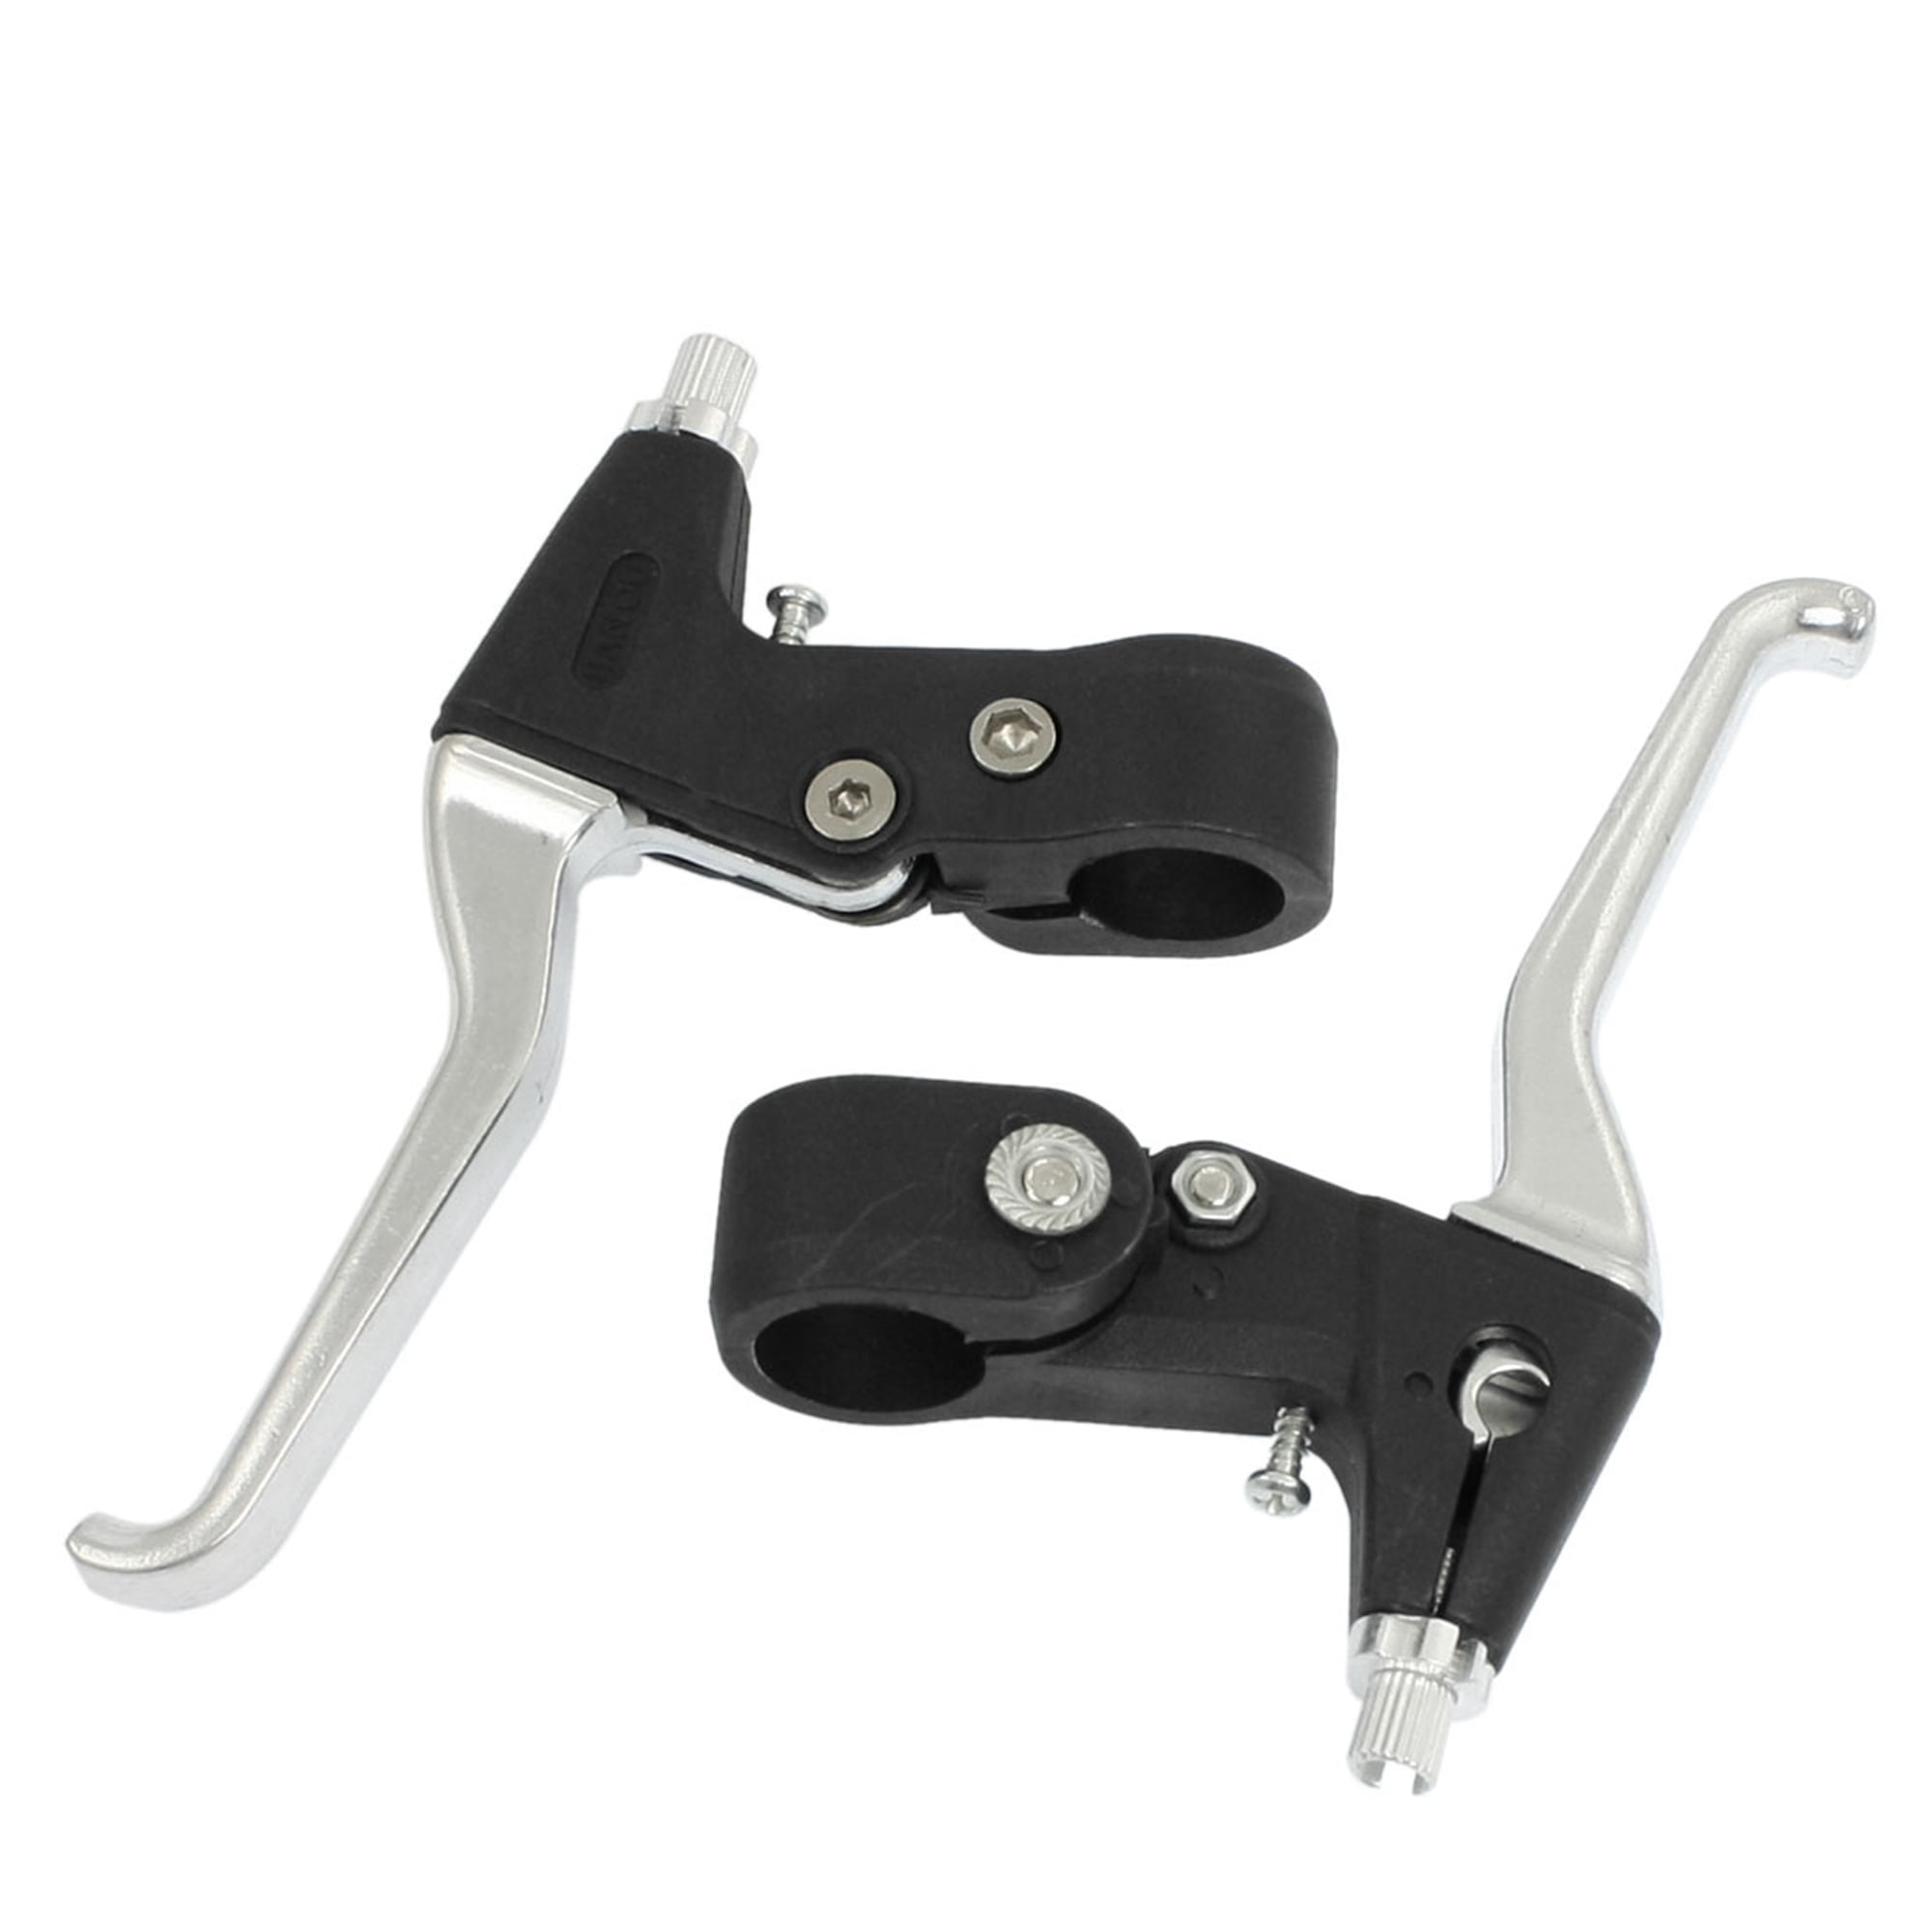 Details about   Mountain bike Brake lever Accessories Bicycle Cycling Ergonomic Practical 